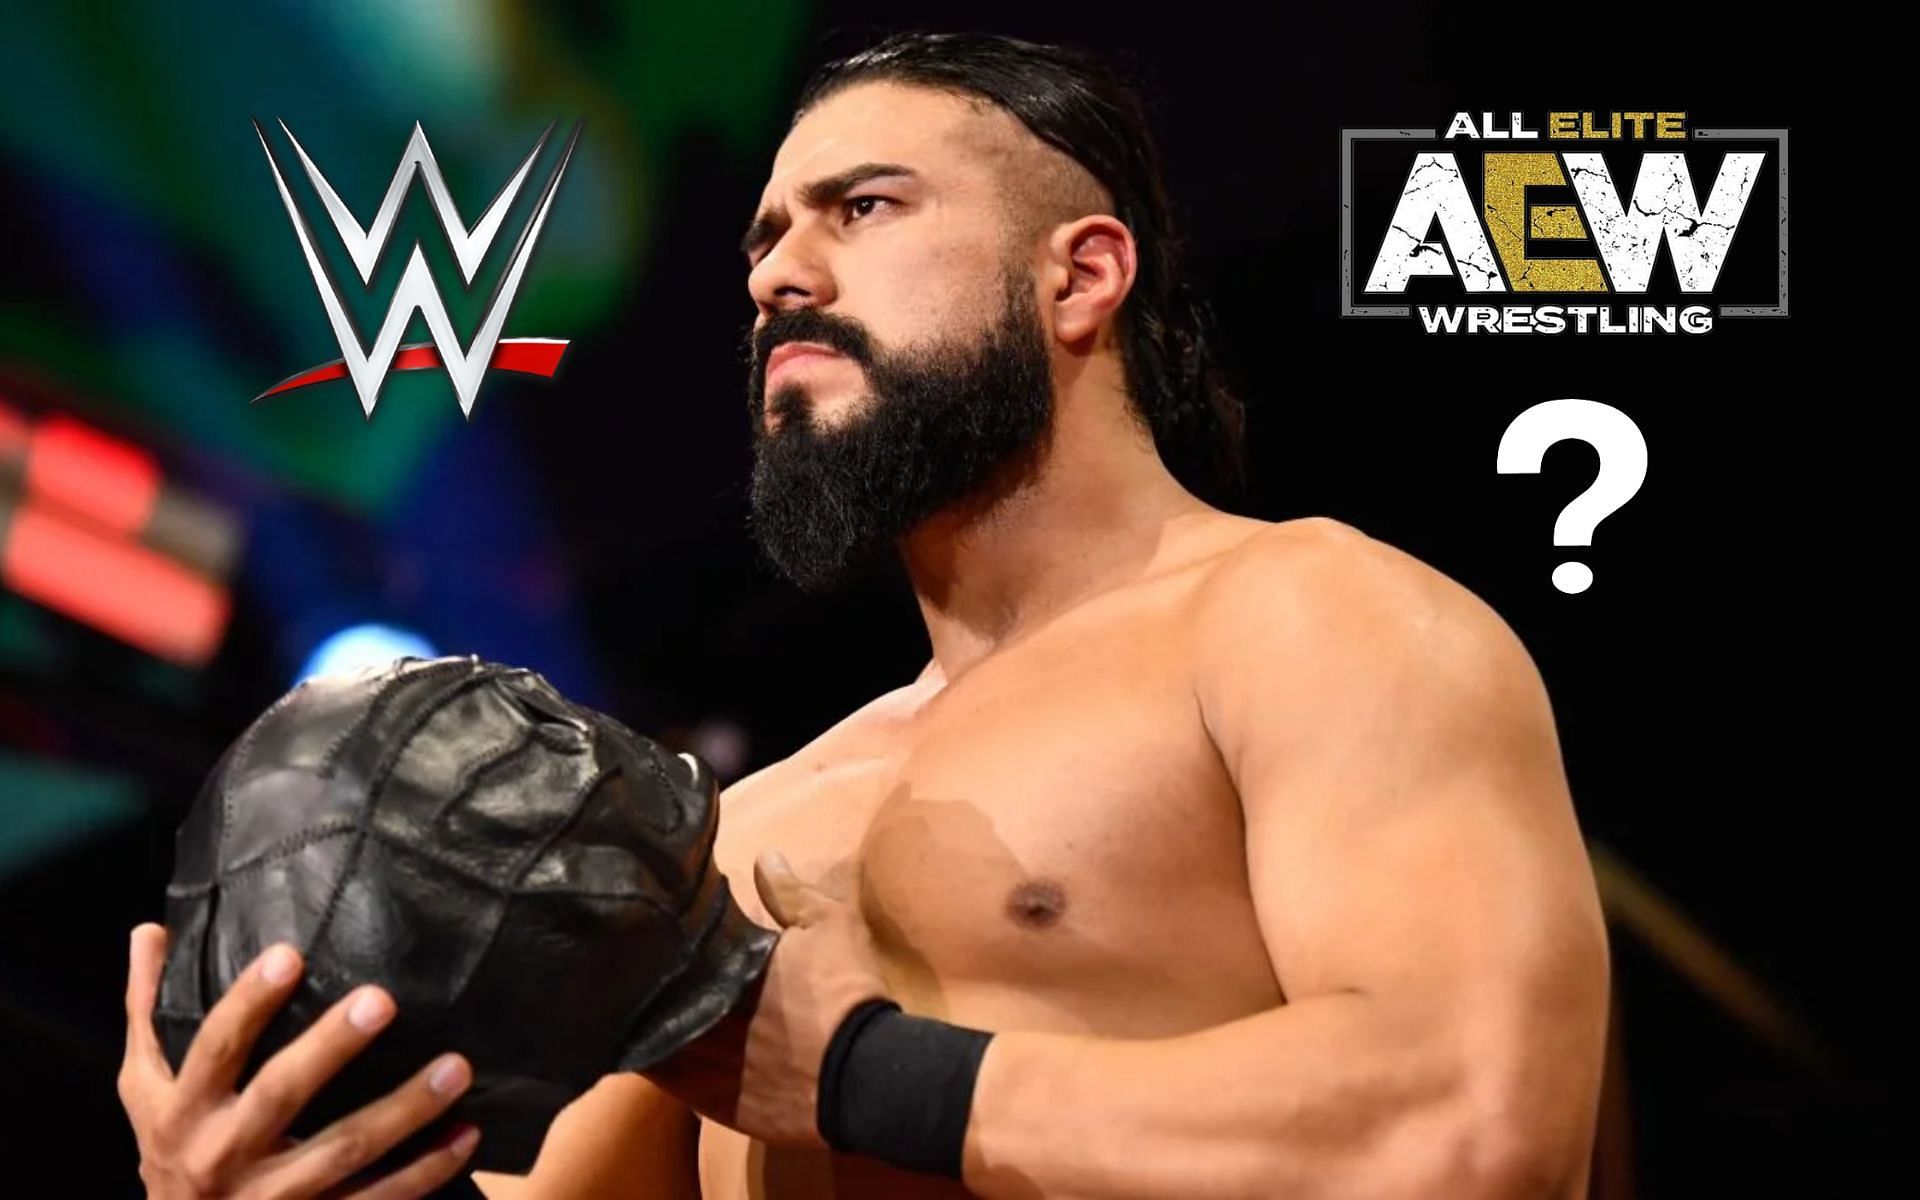 Will AEW star Andrade El Idolo make a potential return to WWE?